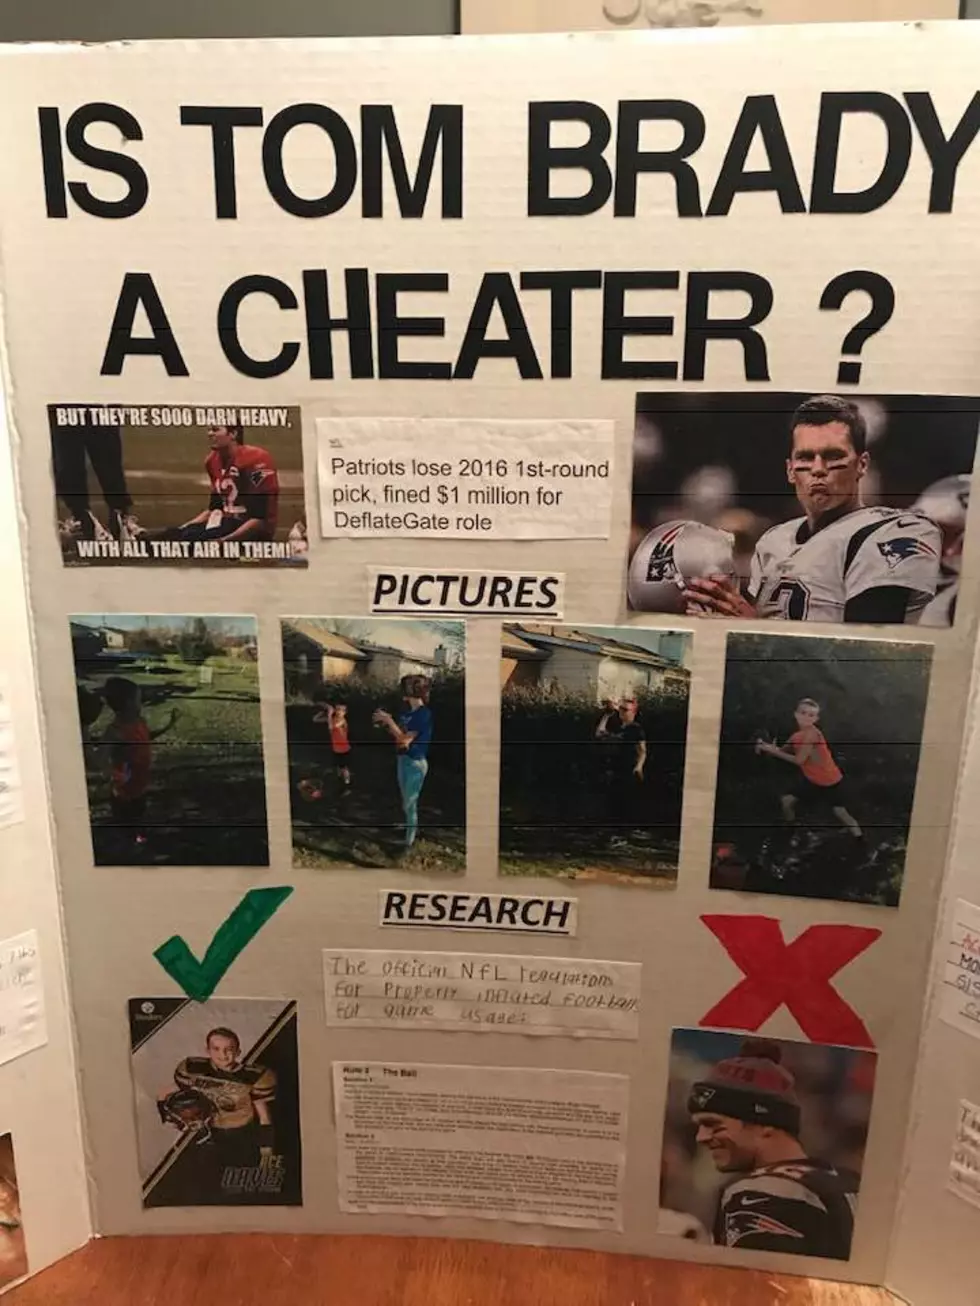 10-Year-Old Claims Tom Brady Is a Cheater, Wins School Science Fair